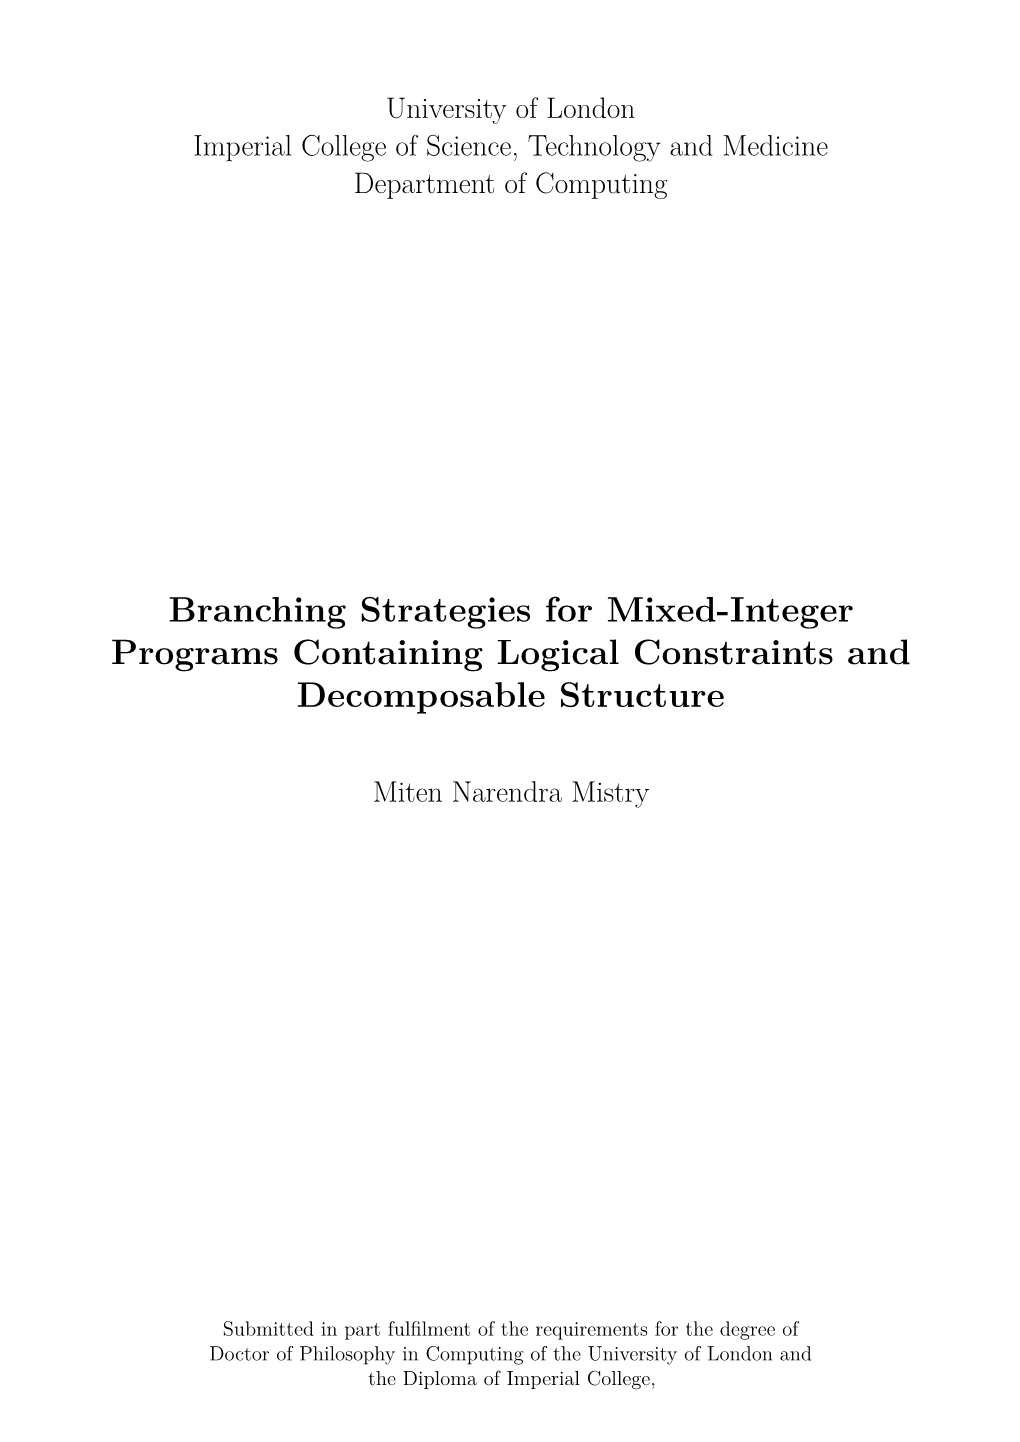 Branching Strategies for Mixed-Integer Programs Containing Logical Constraints and Decomposable Structure